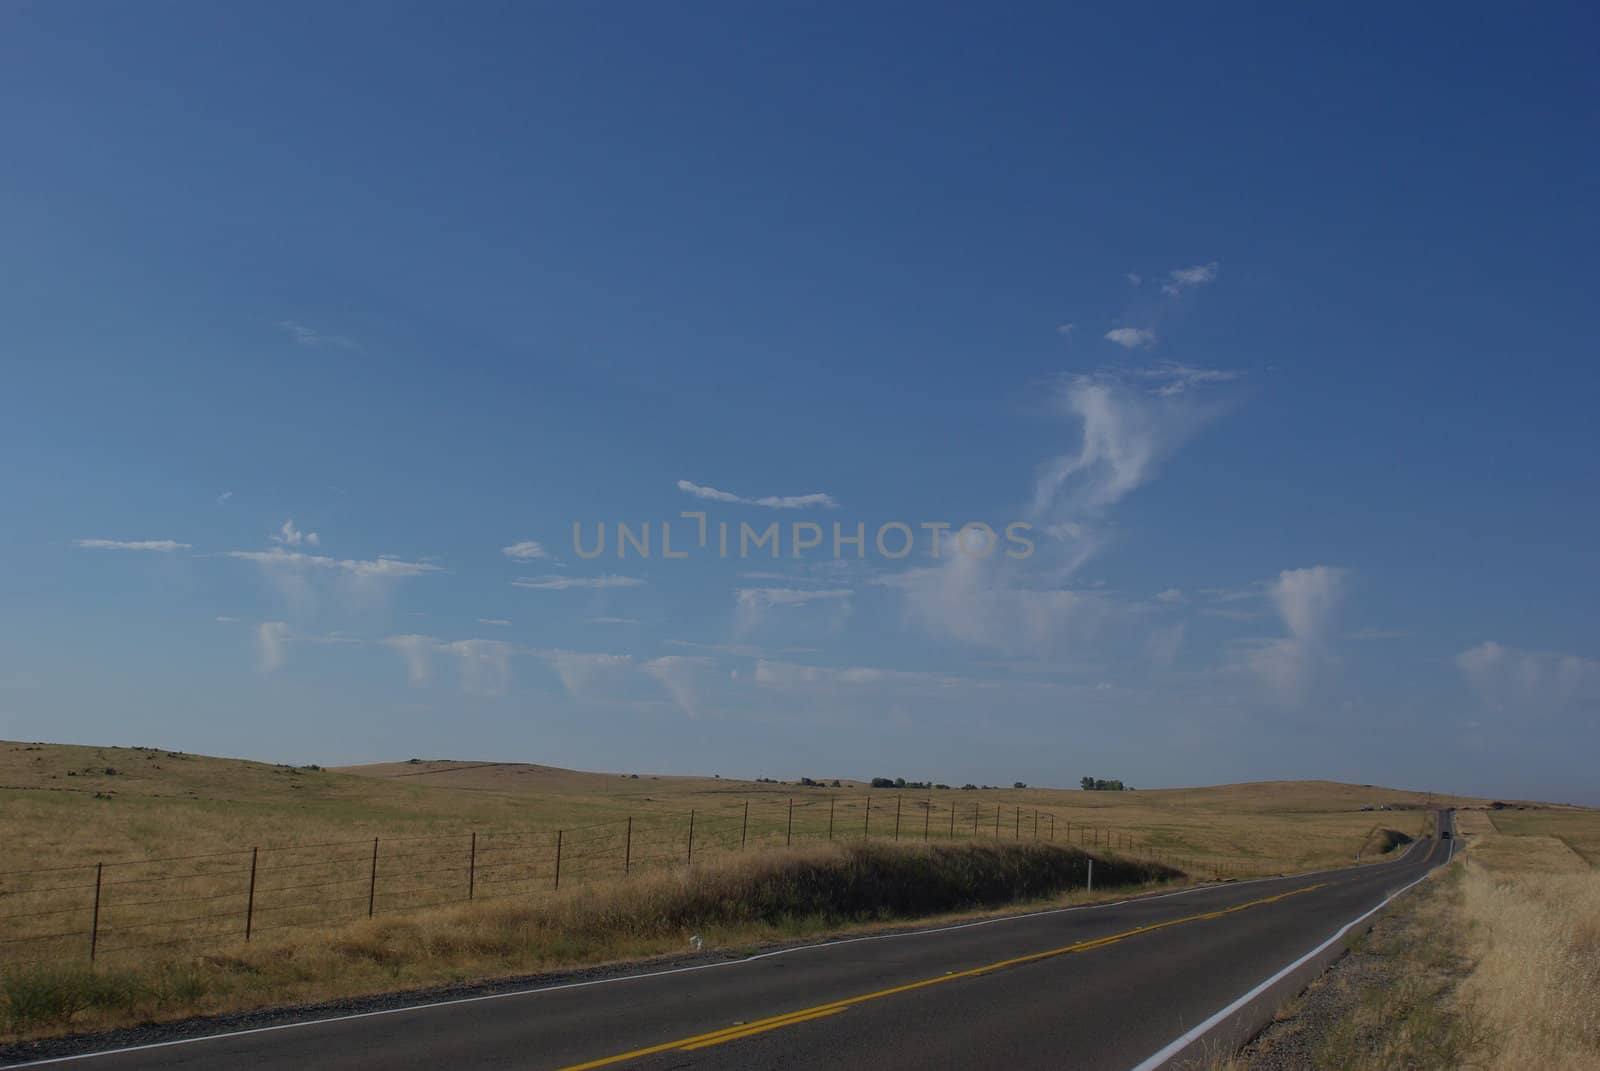 A 2 lane road cuts across prairie hills covered with dry grass with unusuale cloud formations in the background.